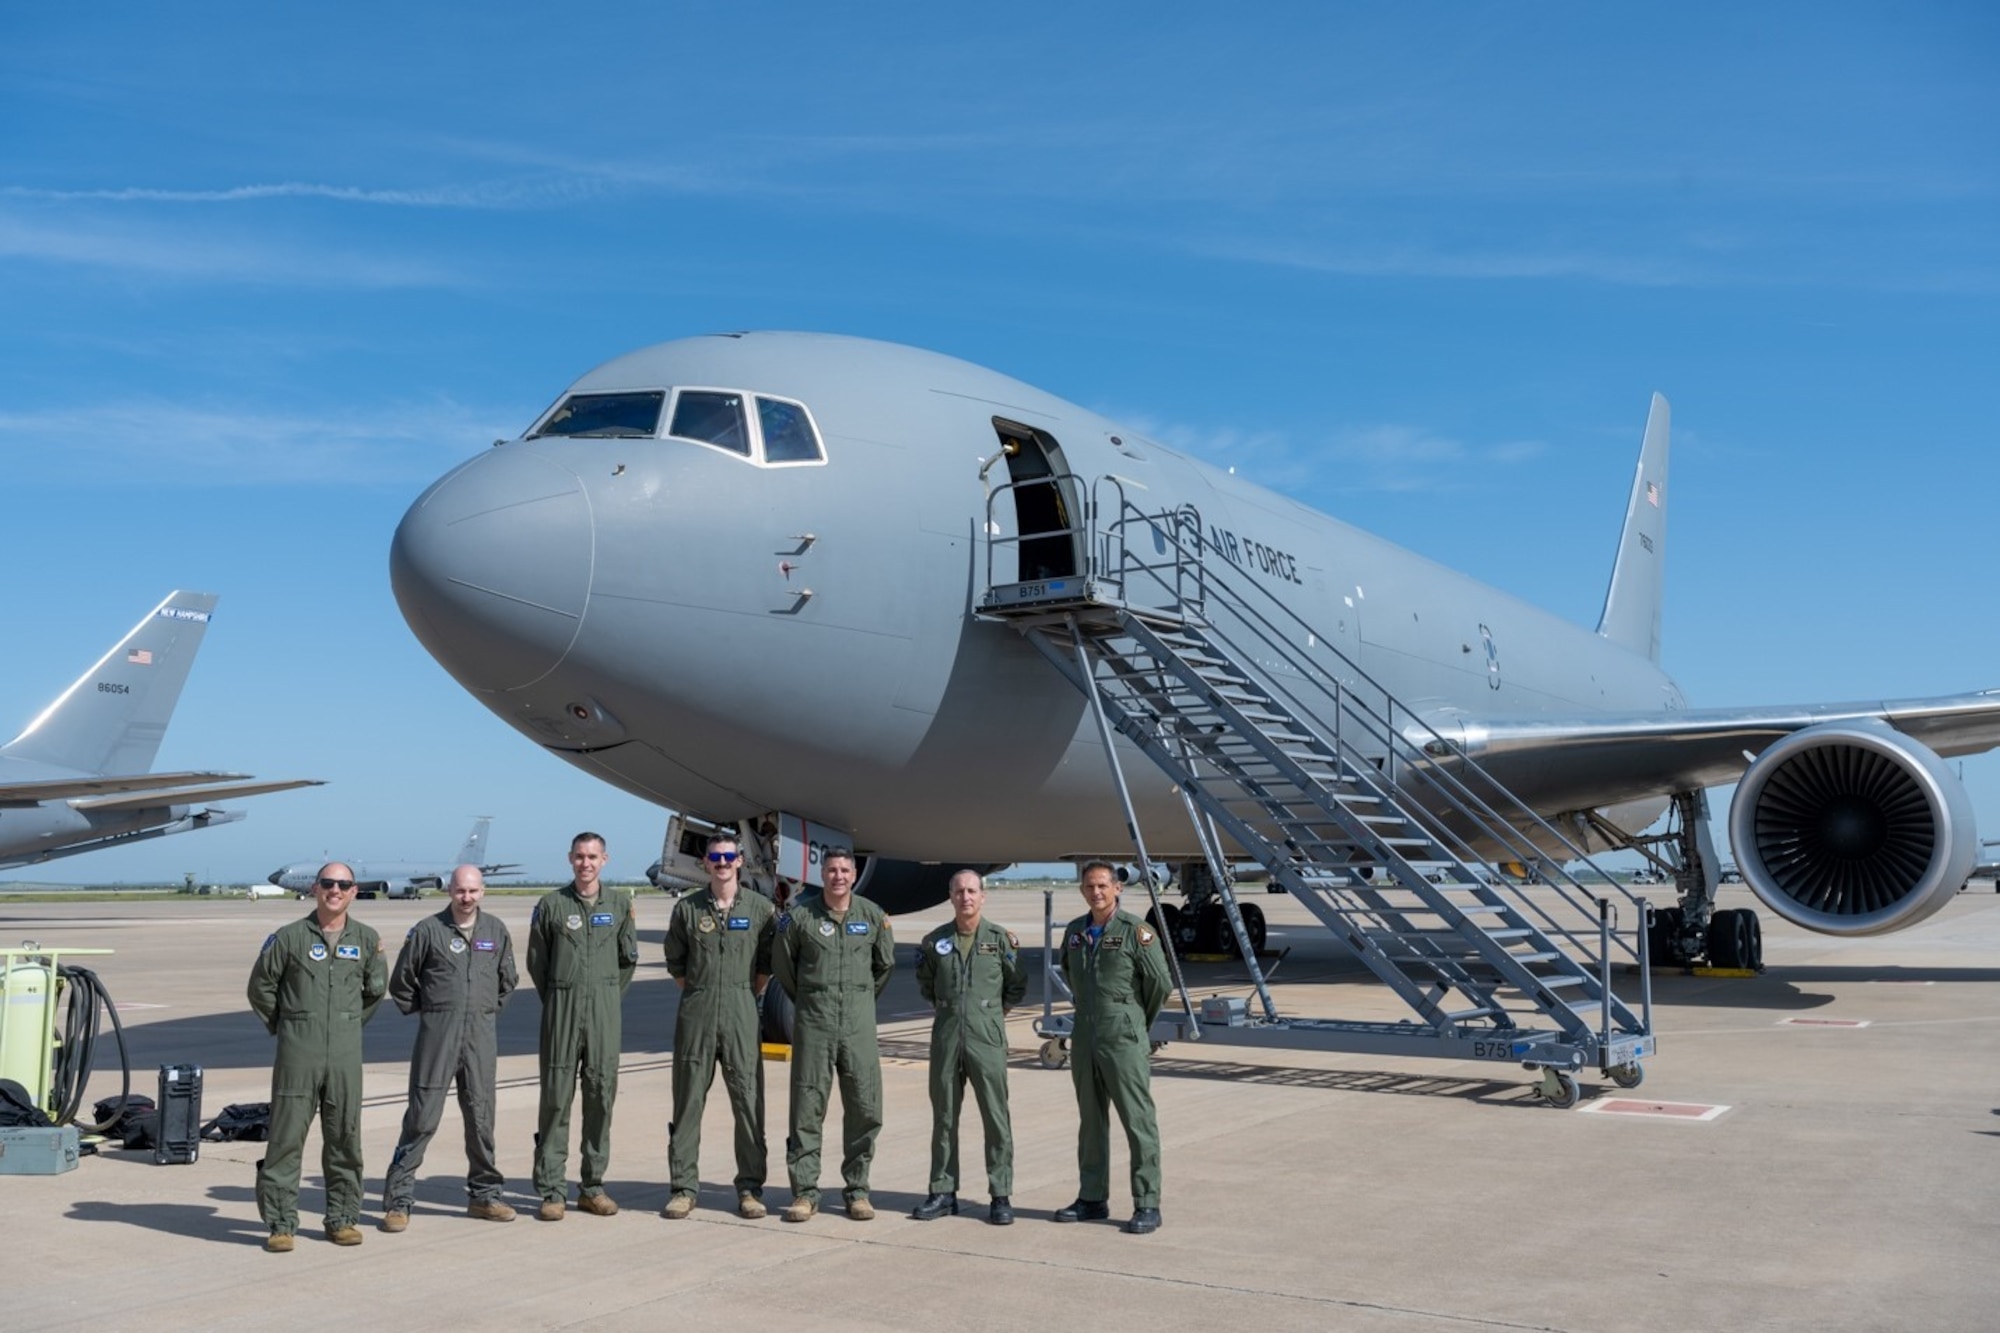 A KC-46A Pegasus crew pose before an orientation flight with Spanish Air Force commanders April 18, 2022 at Morón Air Base, Spain. From left to right: U.S. Air Force Lt. Col. Mark Nexon, Capt. Steven Strickland, Master Sgt. Clay Wonders, Capt. Seth Jackson, Lt. Col. Joshua Moores, Spanish Air Force Col. Enrique Fernandez Ambel, and Spanish Air Force Lt. Col. Ignacio Zulueta Martin. (U.S. Air Force photo by Staff Sgt. Nathan Eckert)